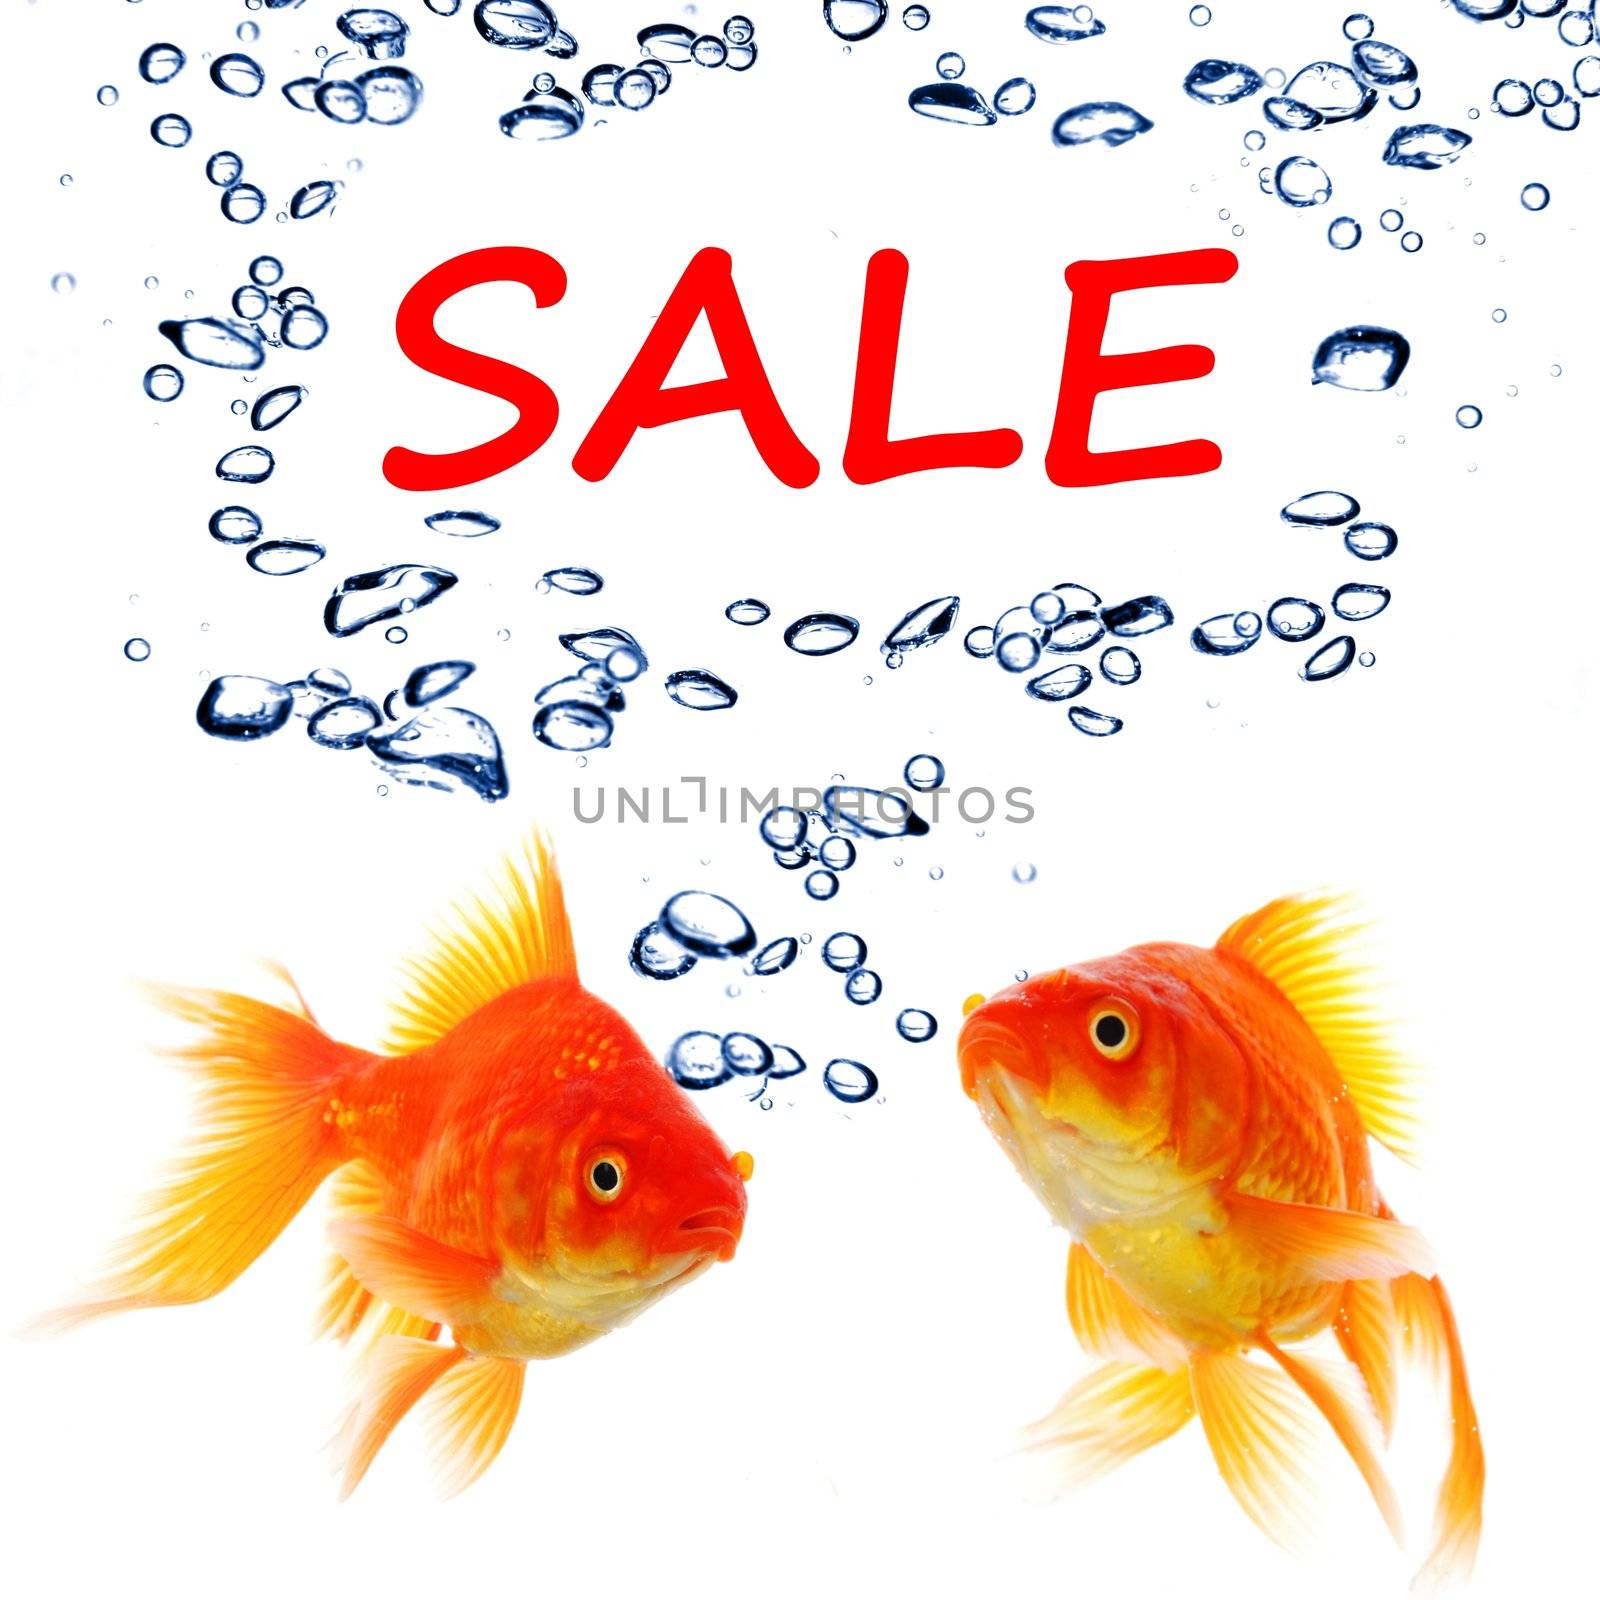 sale marketing or shopping concept with goldfish on white